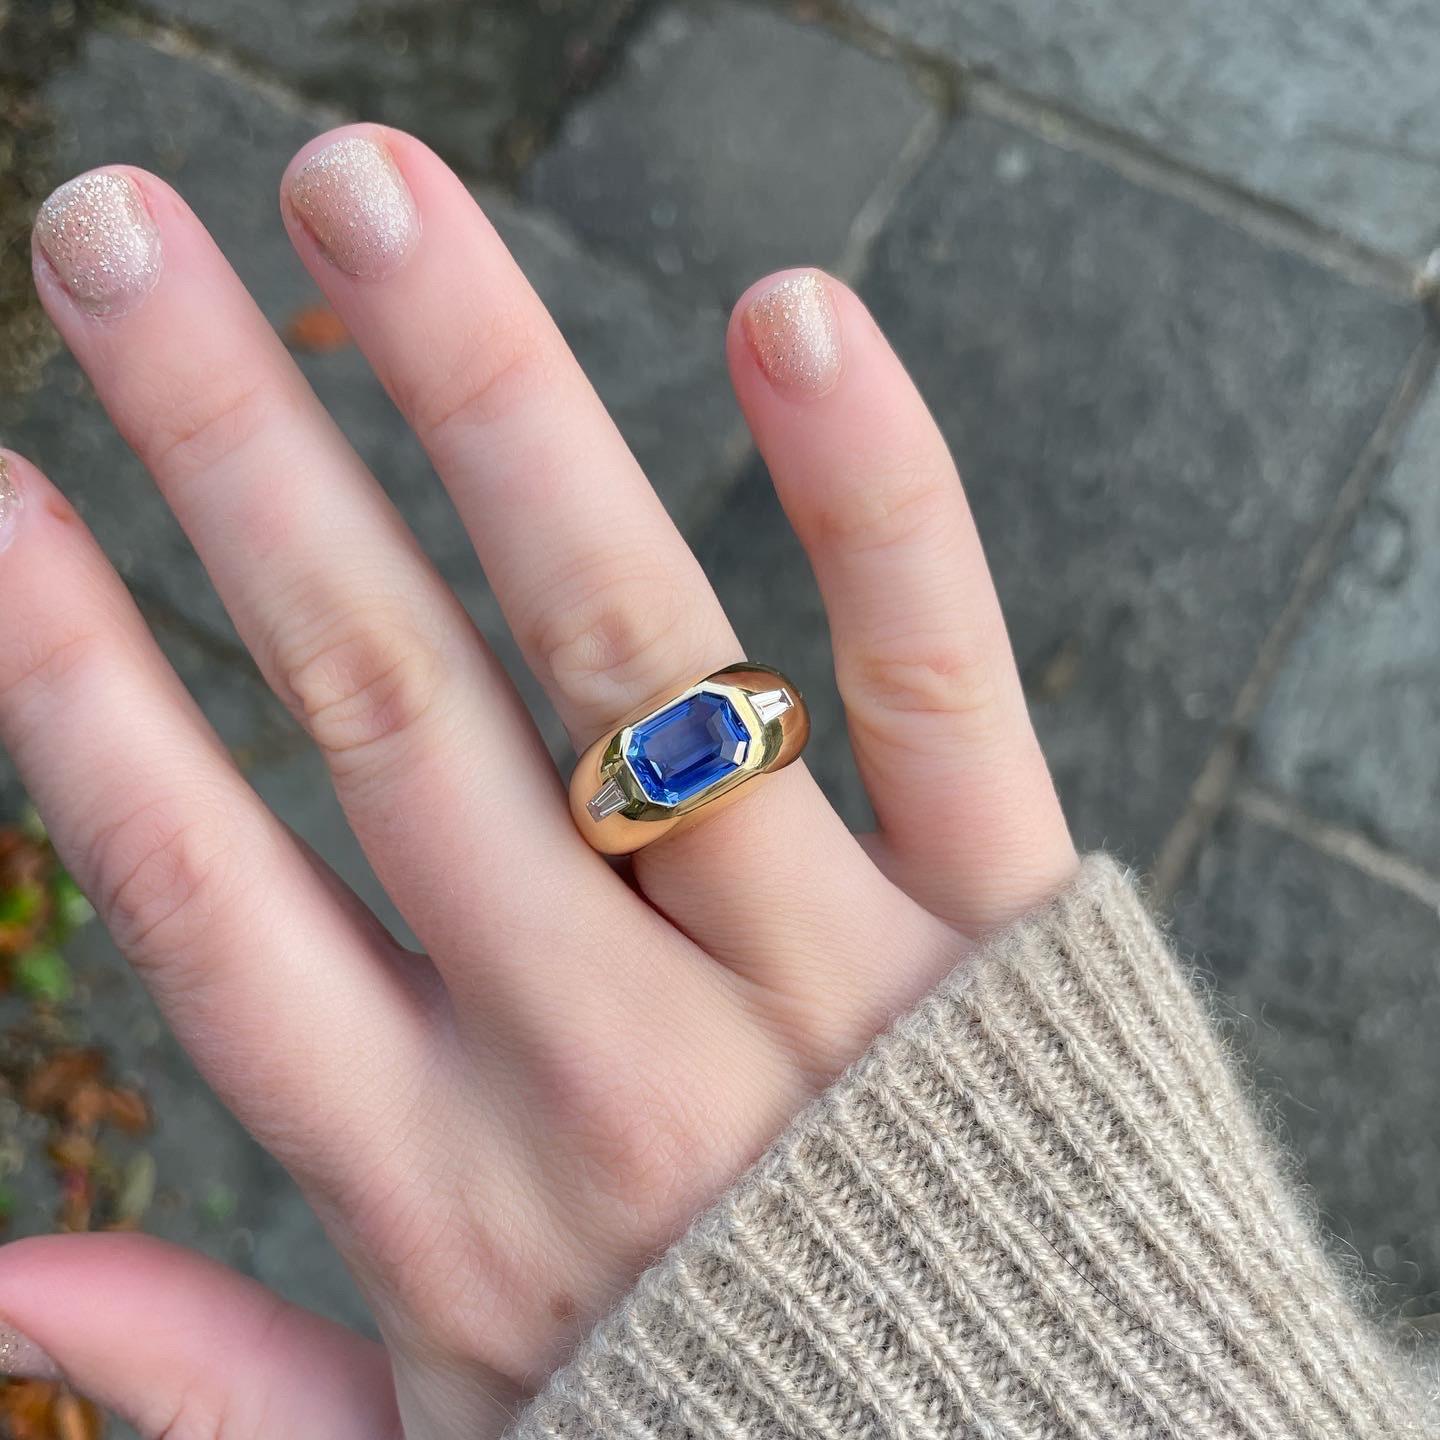 3.16ct Sapphire (No Heat)
0.40ct Diamonds
18k Yellow Gold

This ring is set with a beautiful, emerald-cut 3.16 carat sapphire (untreated), and tapered baguette Diamonds.

Sapphires are part of the Corundum family (Ruby's & Sapphires). They are 9 on